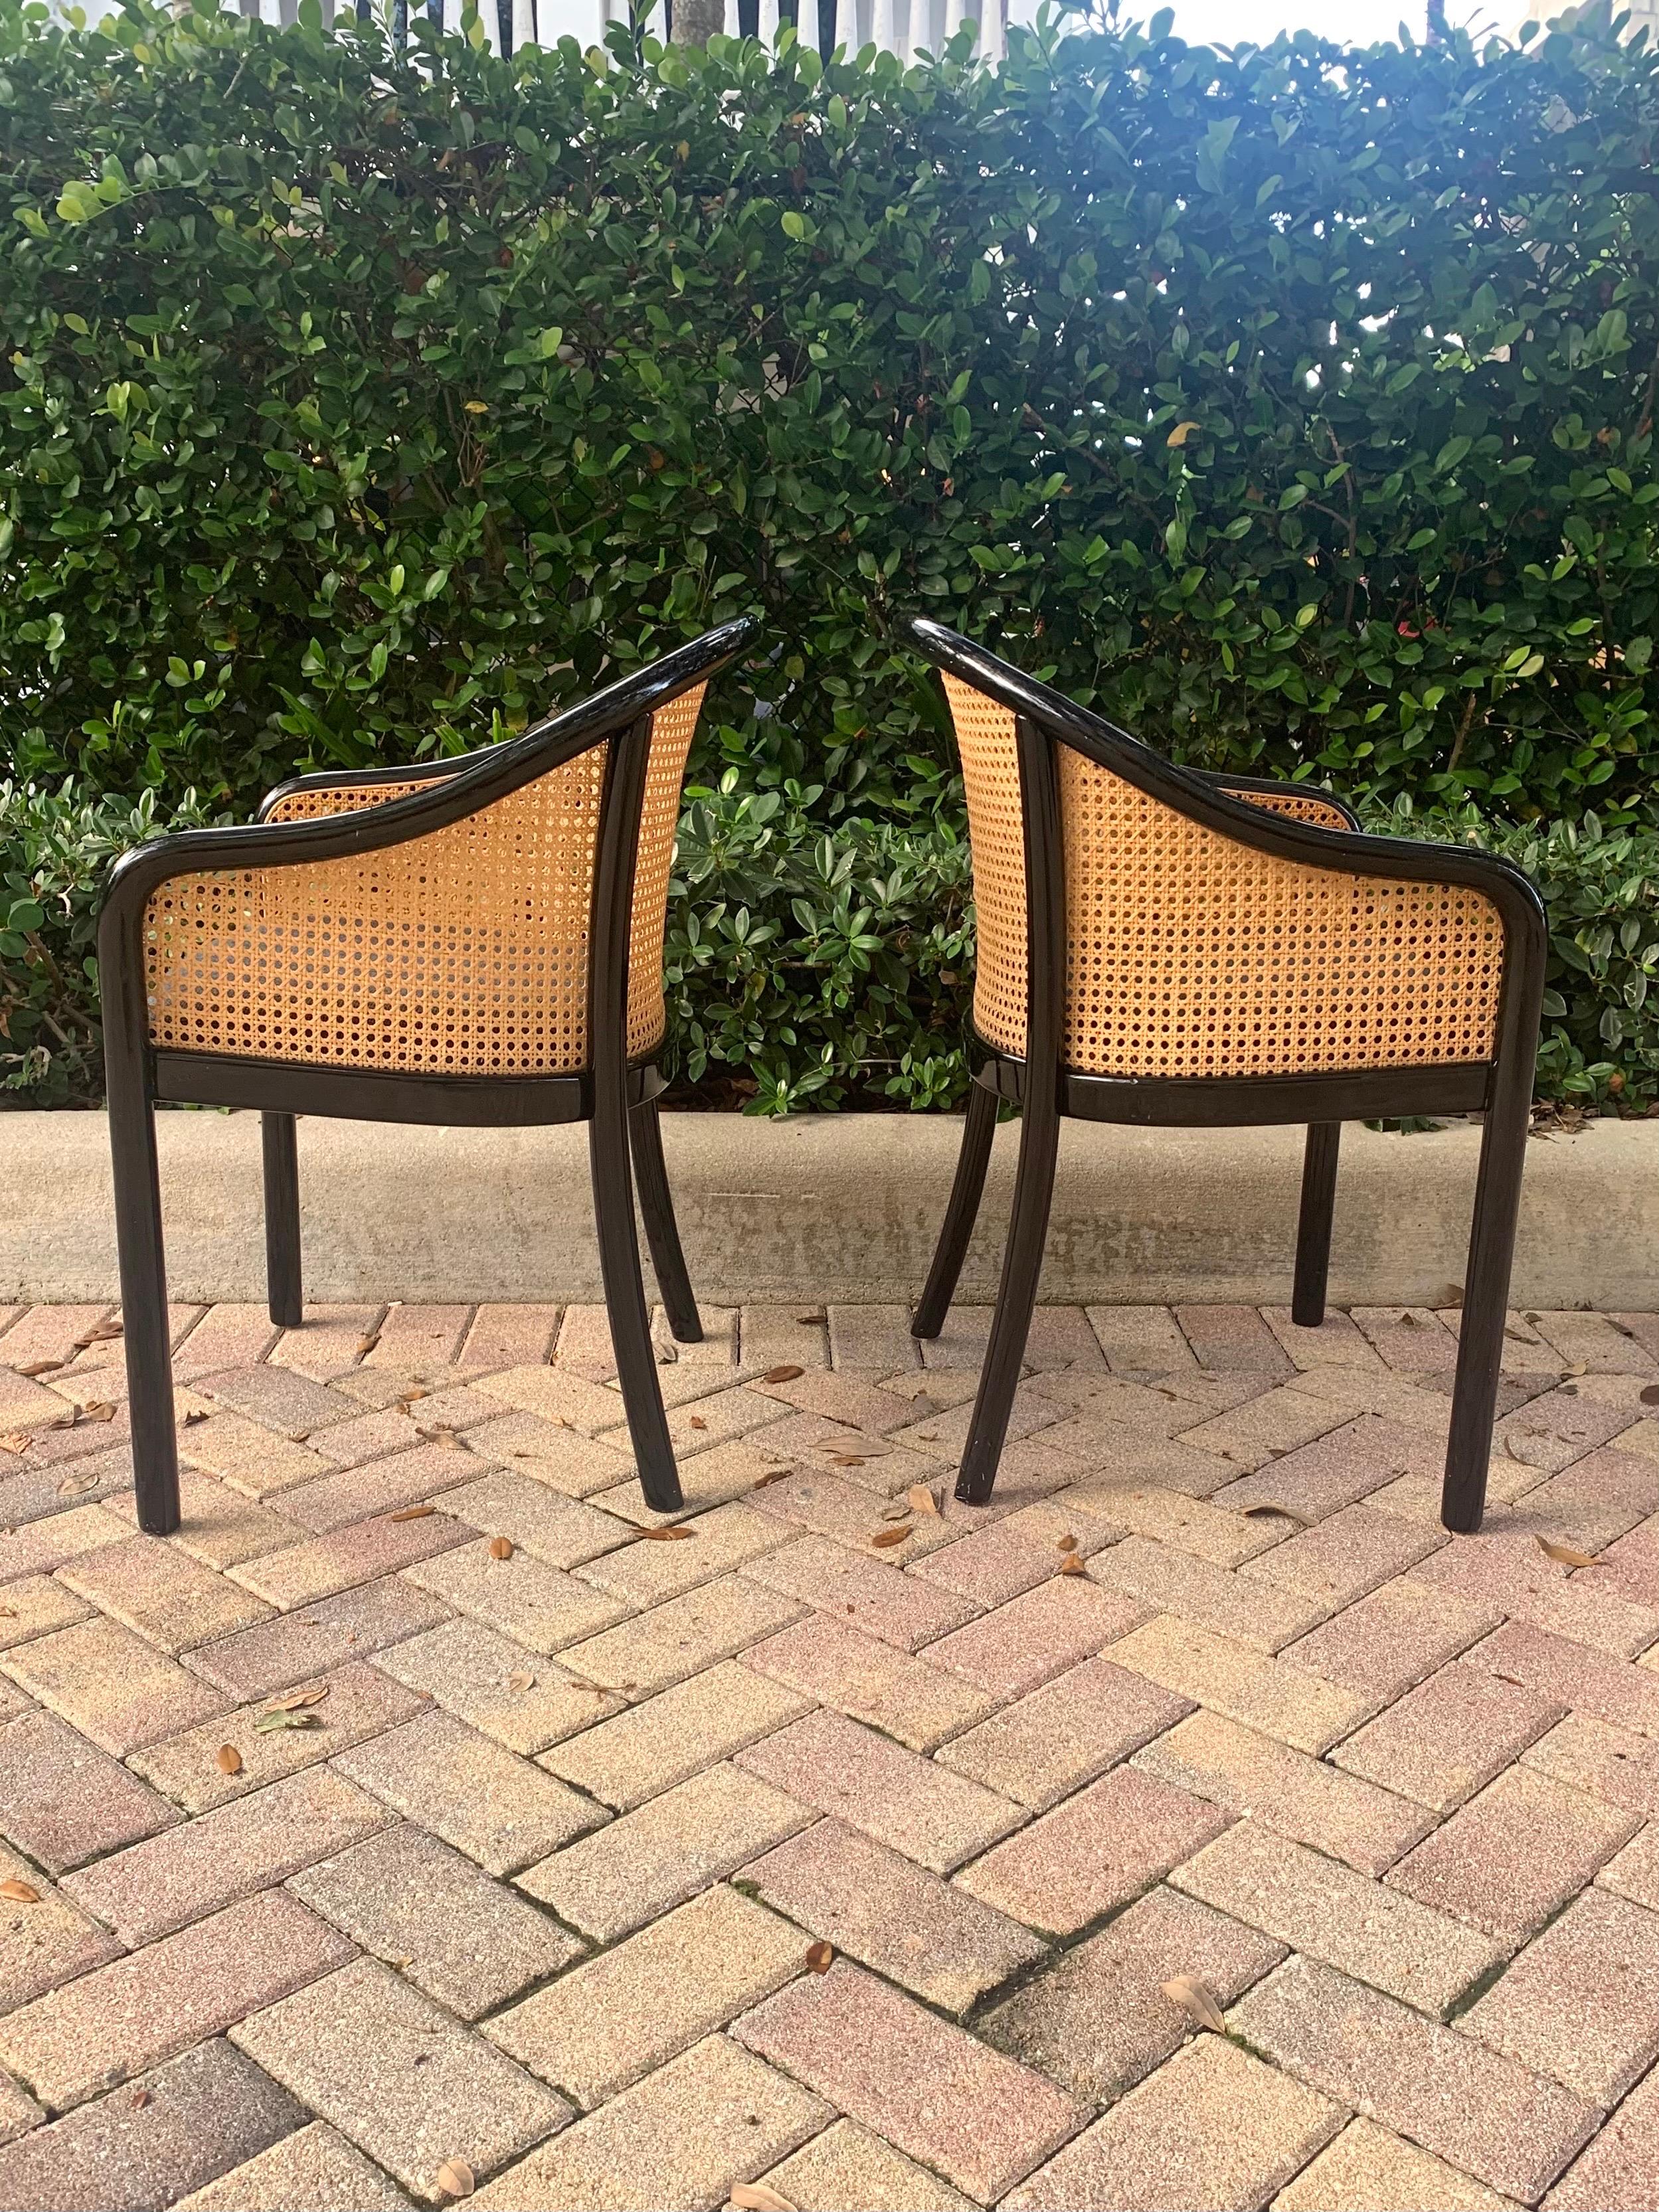 Mid-Century Modern Ward Bennett Landmark Style Lounge Chairs in Wood and Cane, a Pair For Sale